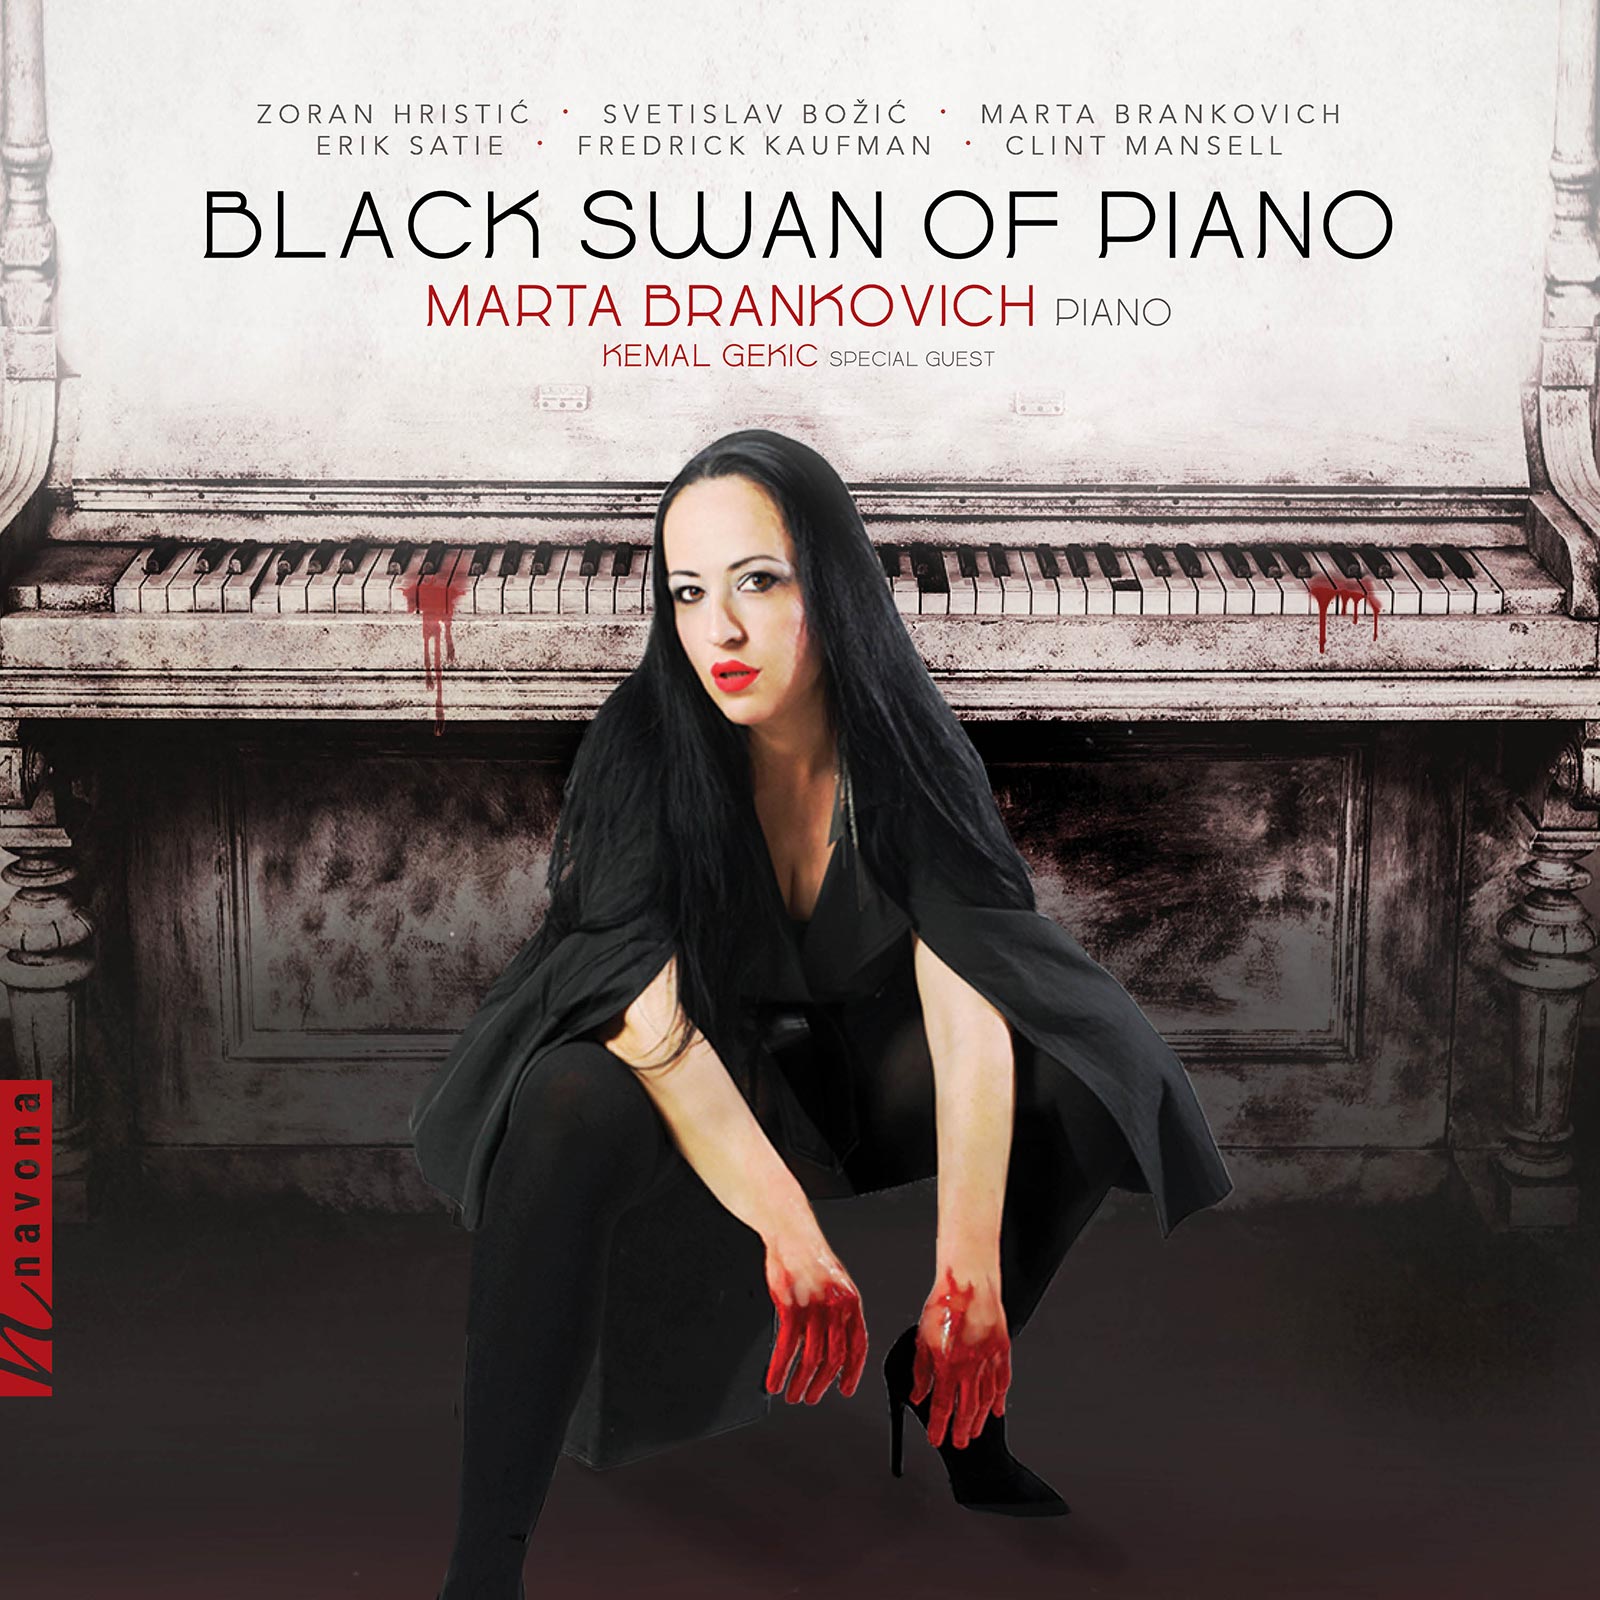 Black Swan of the Piano